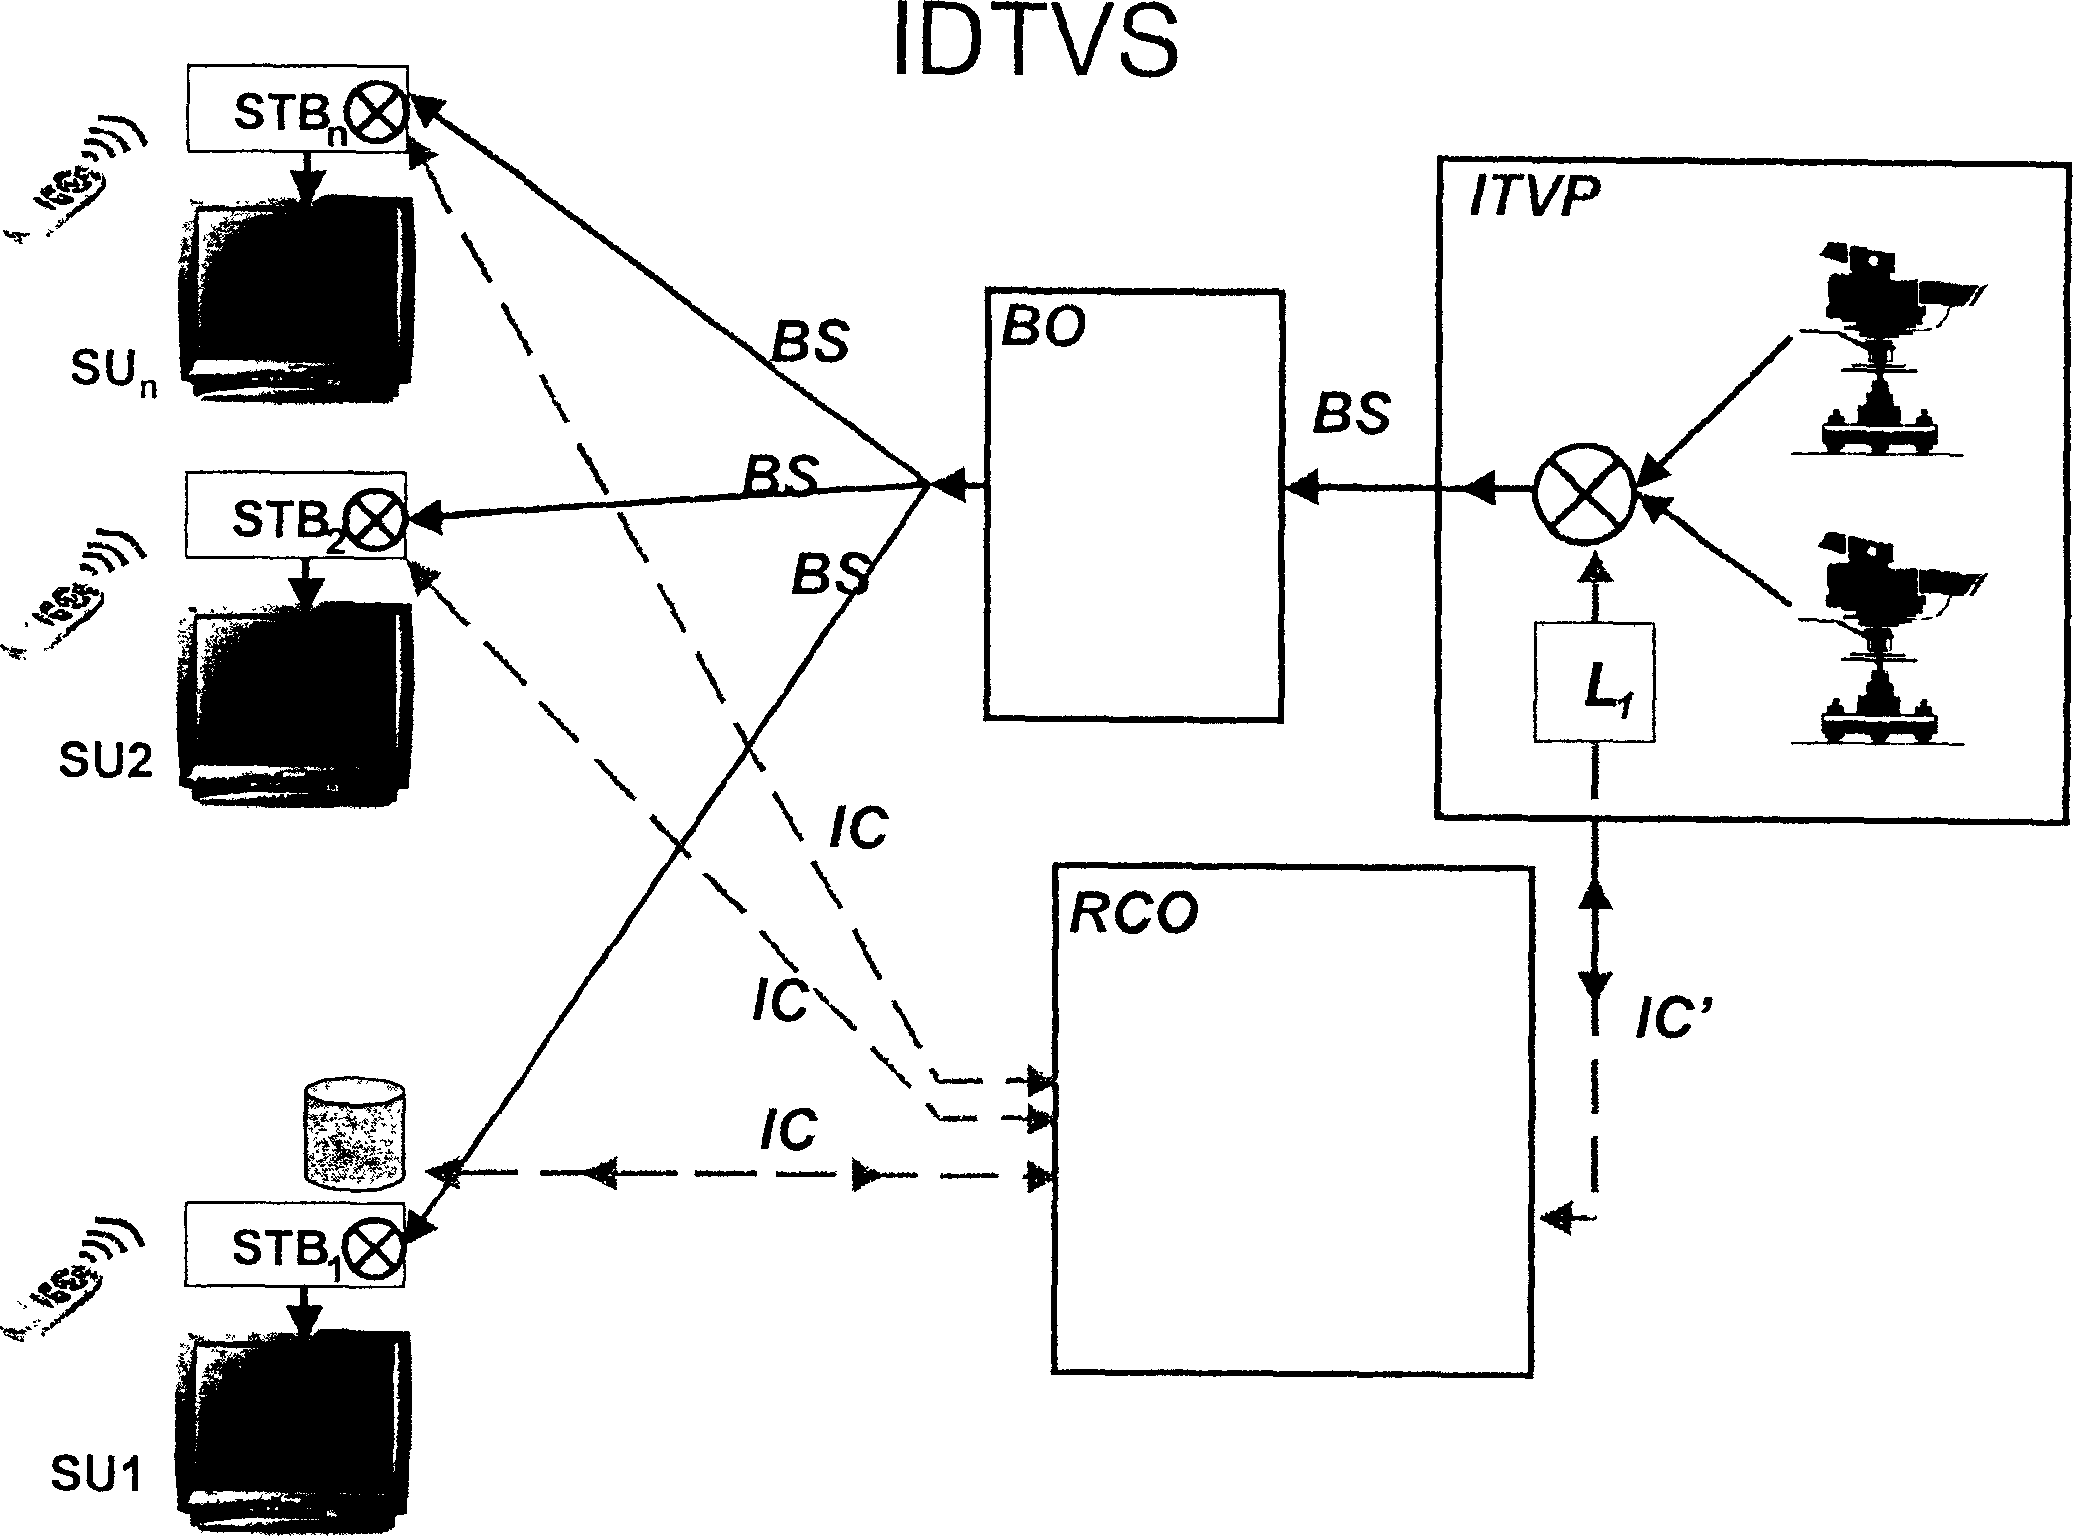 Interactive digital television broadcast system